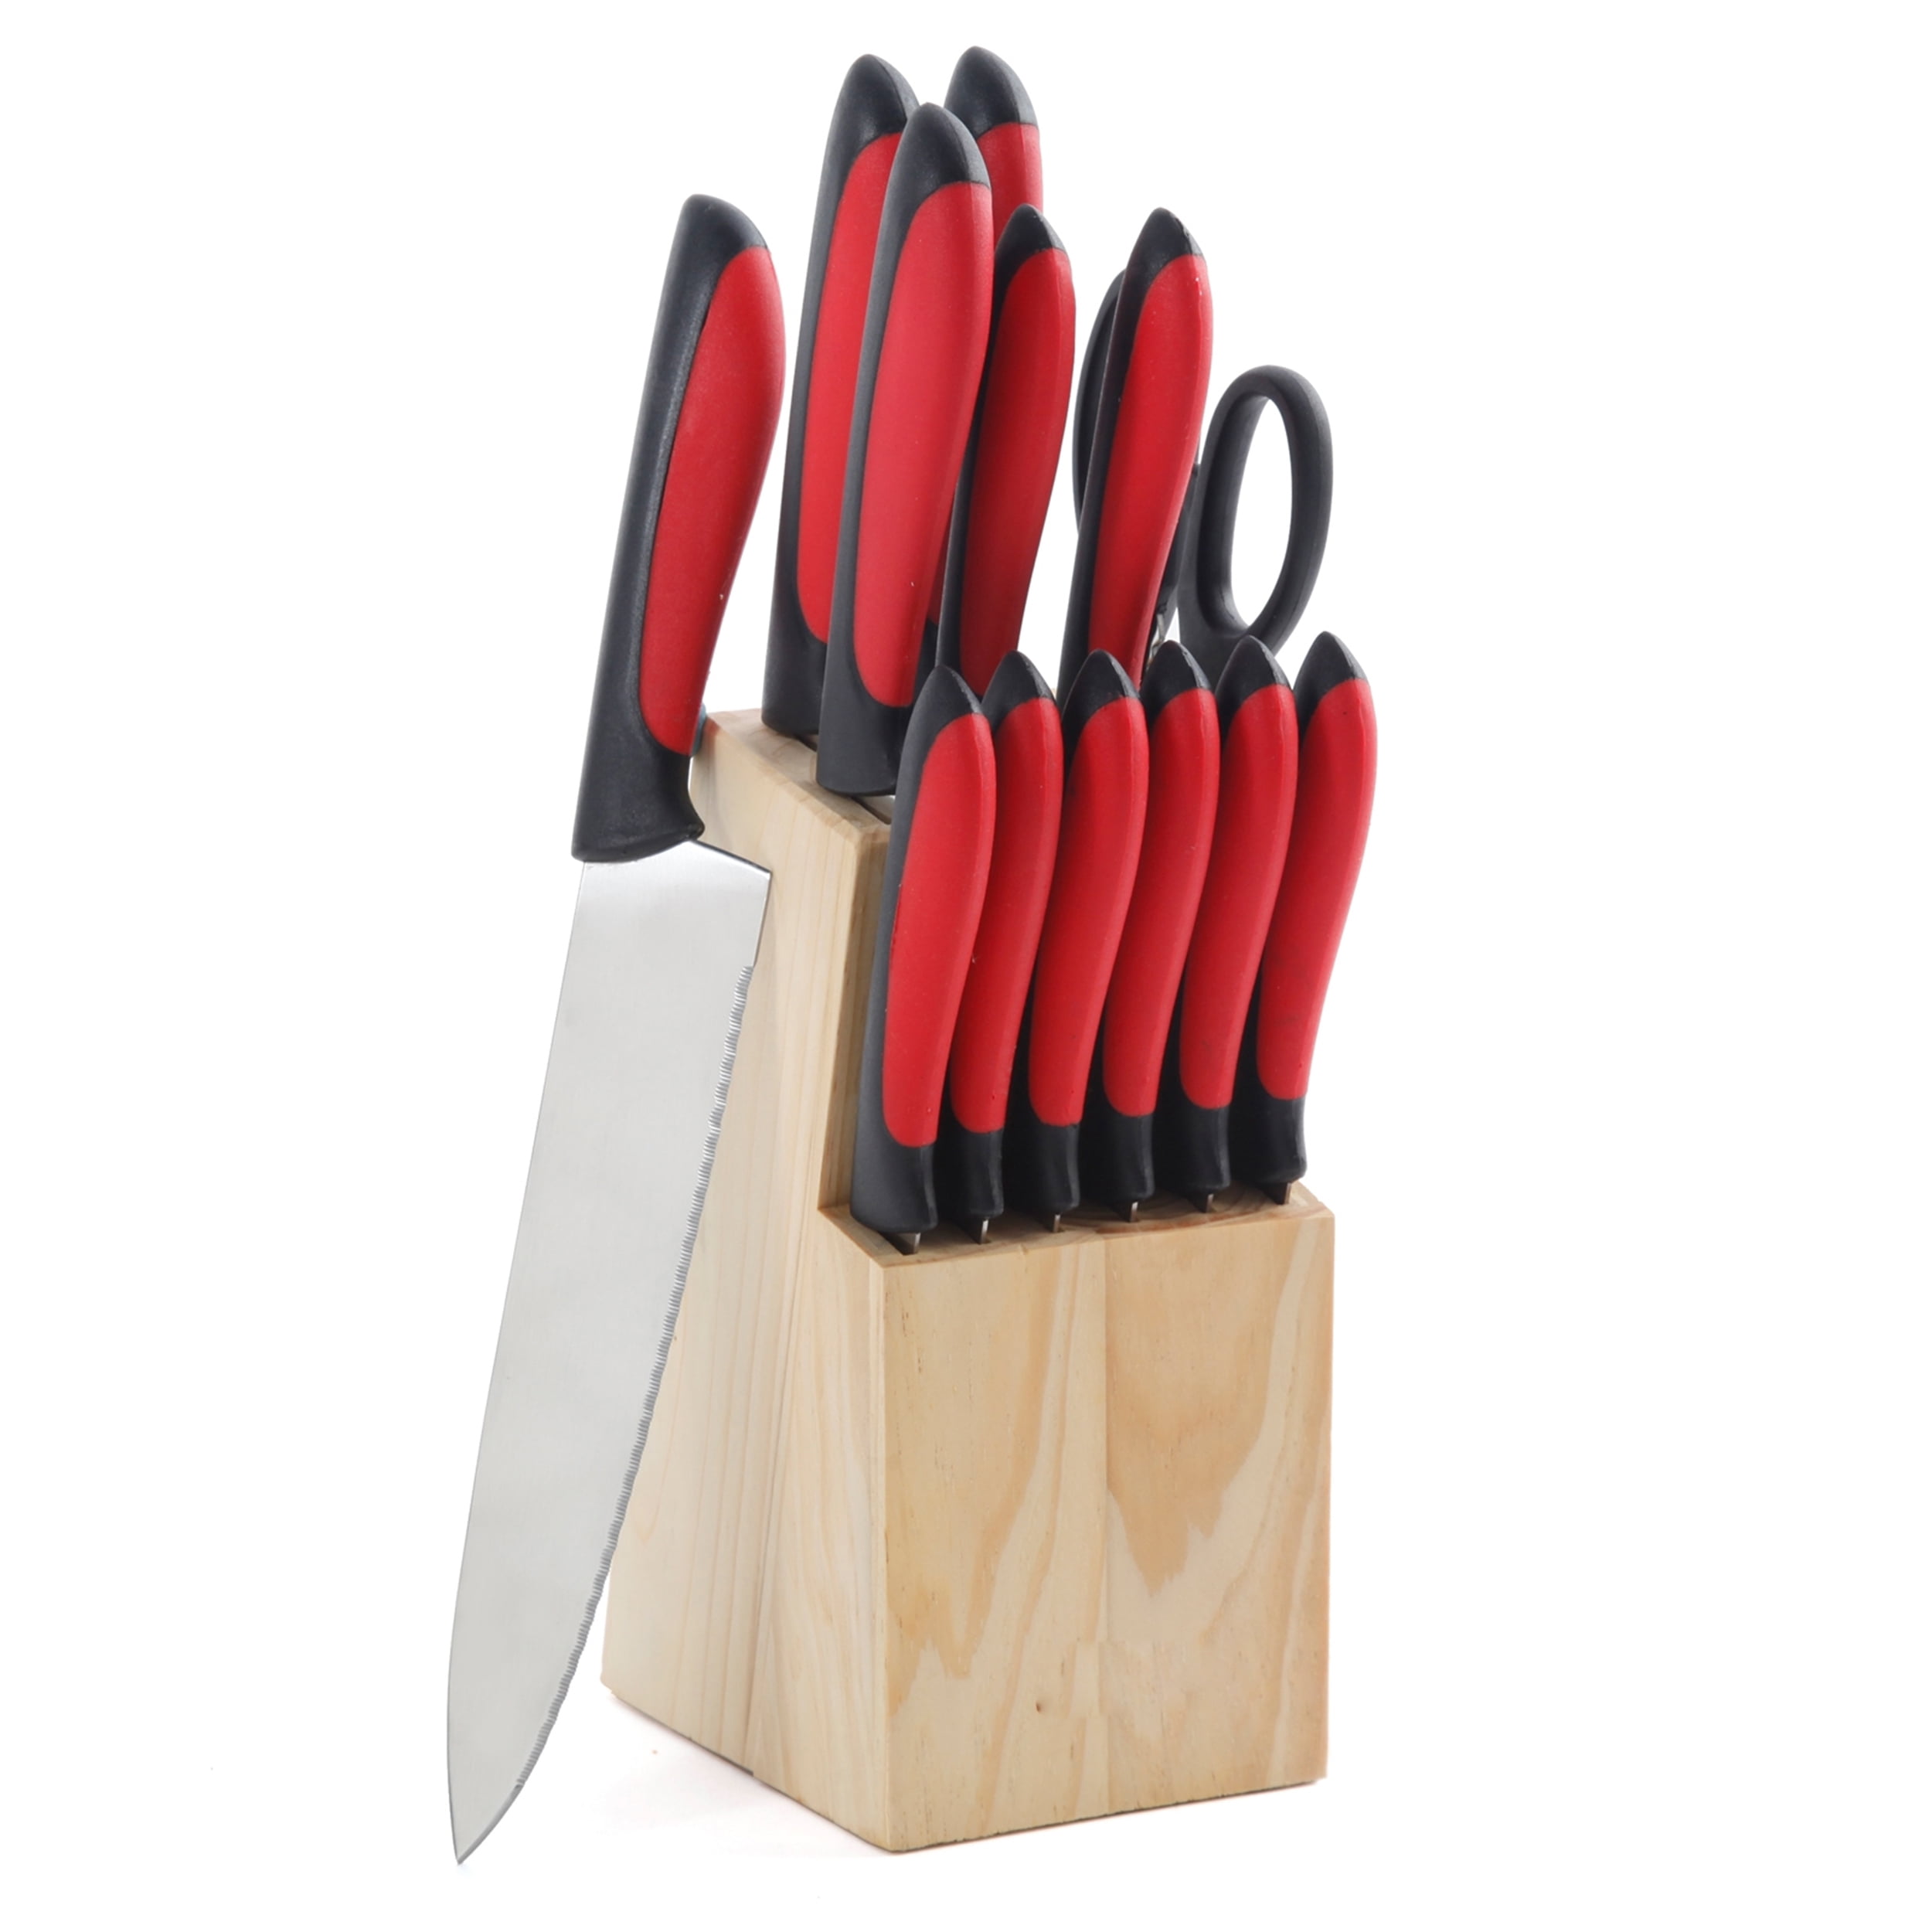 McCook MC35 11-Piece Kitchen Cutlery Knife Block Set with Built-in